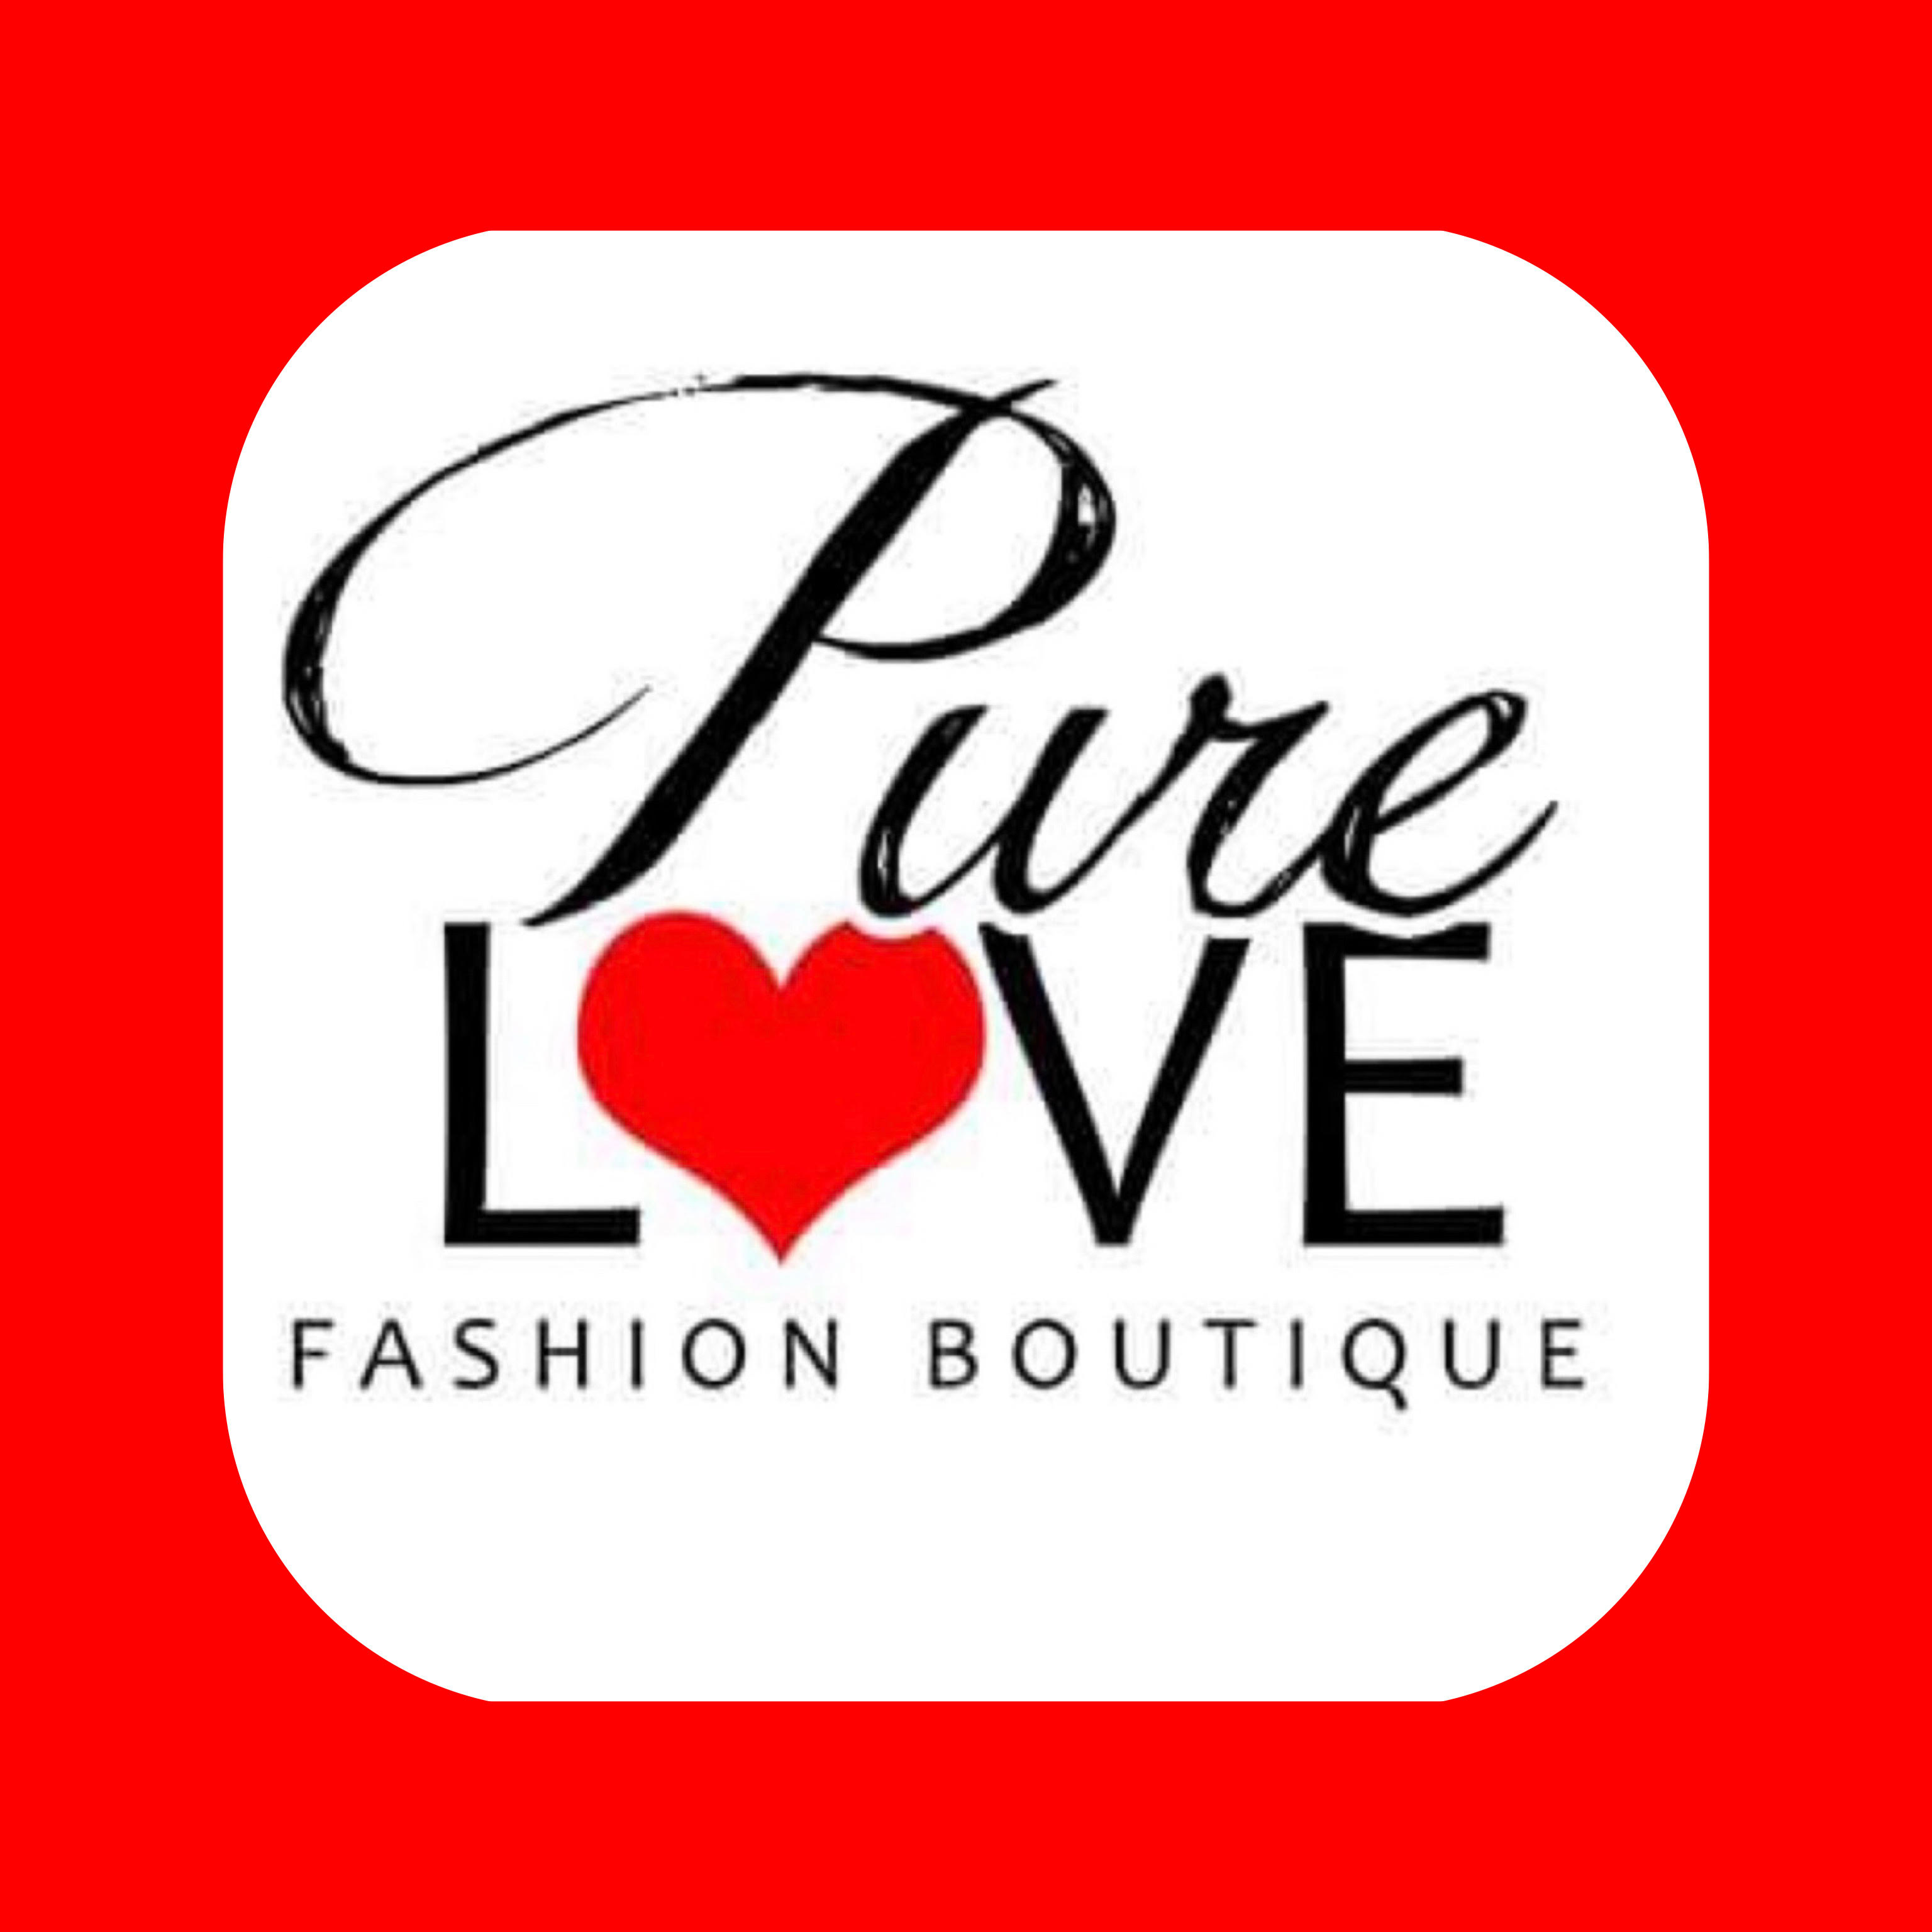 The logo or business face of "PureLove LLC"